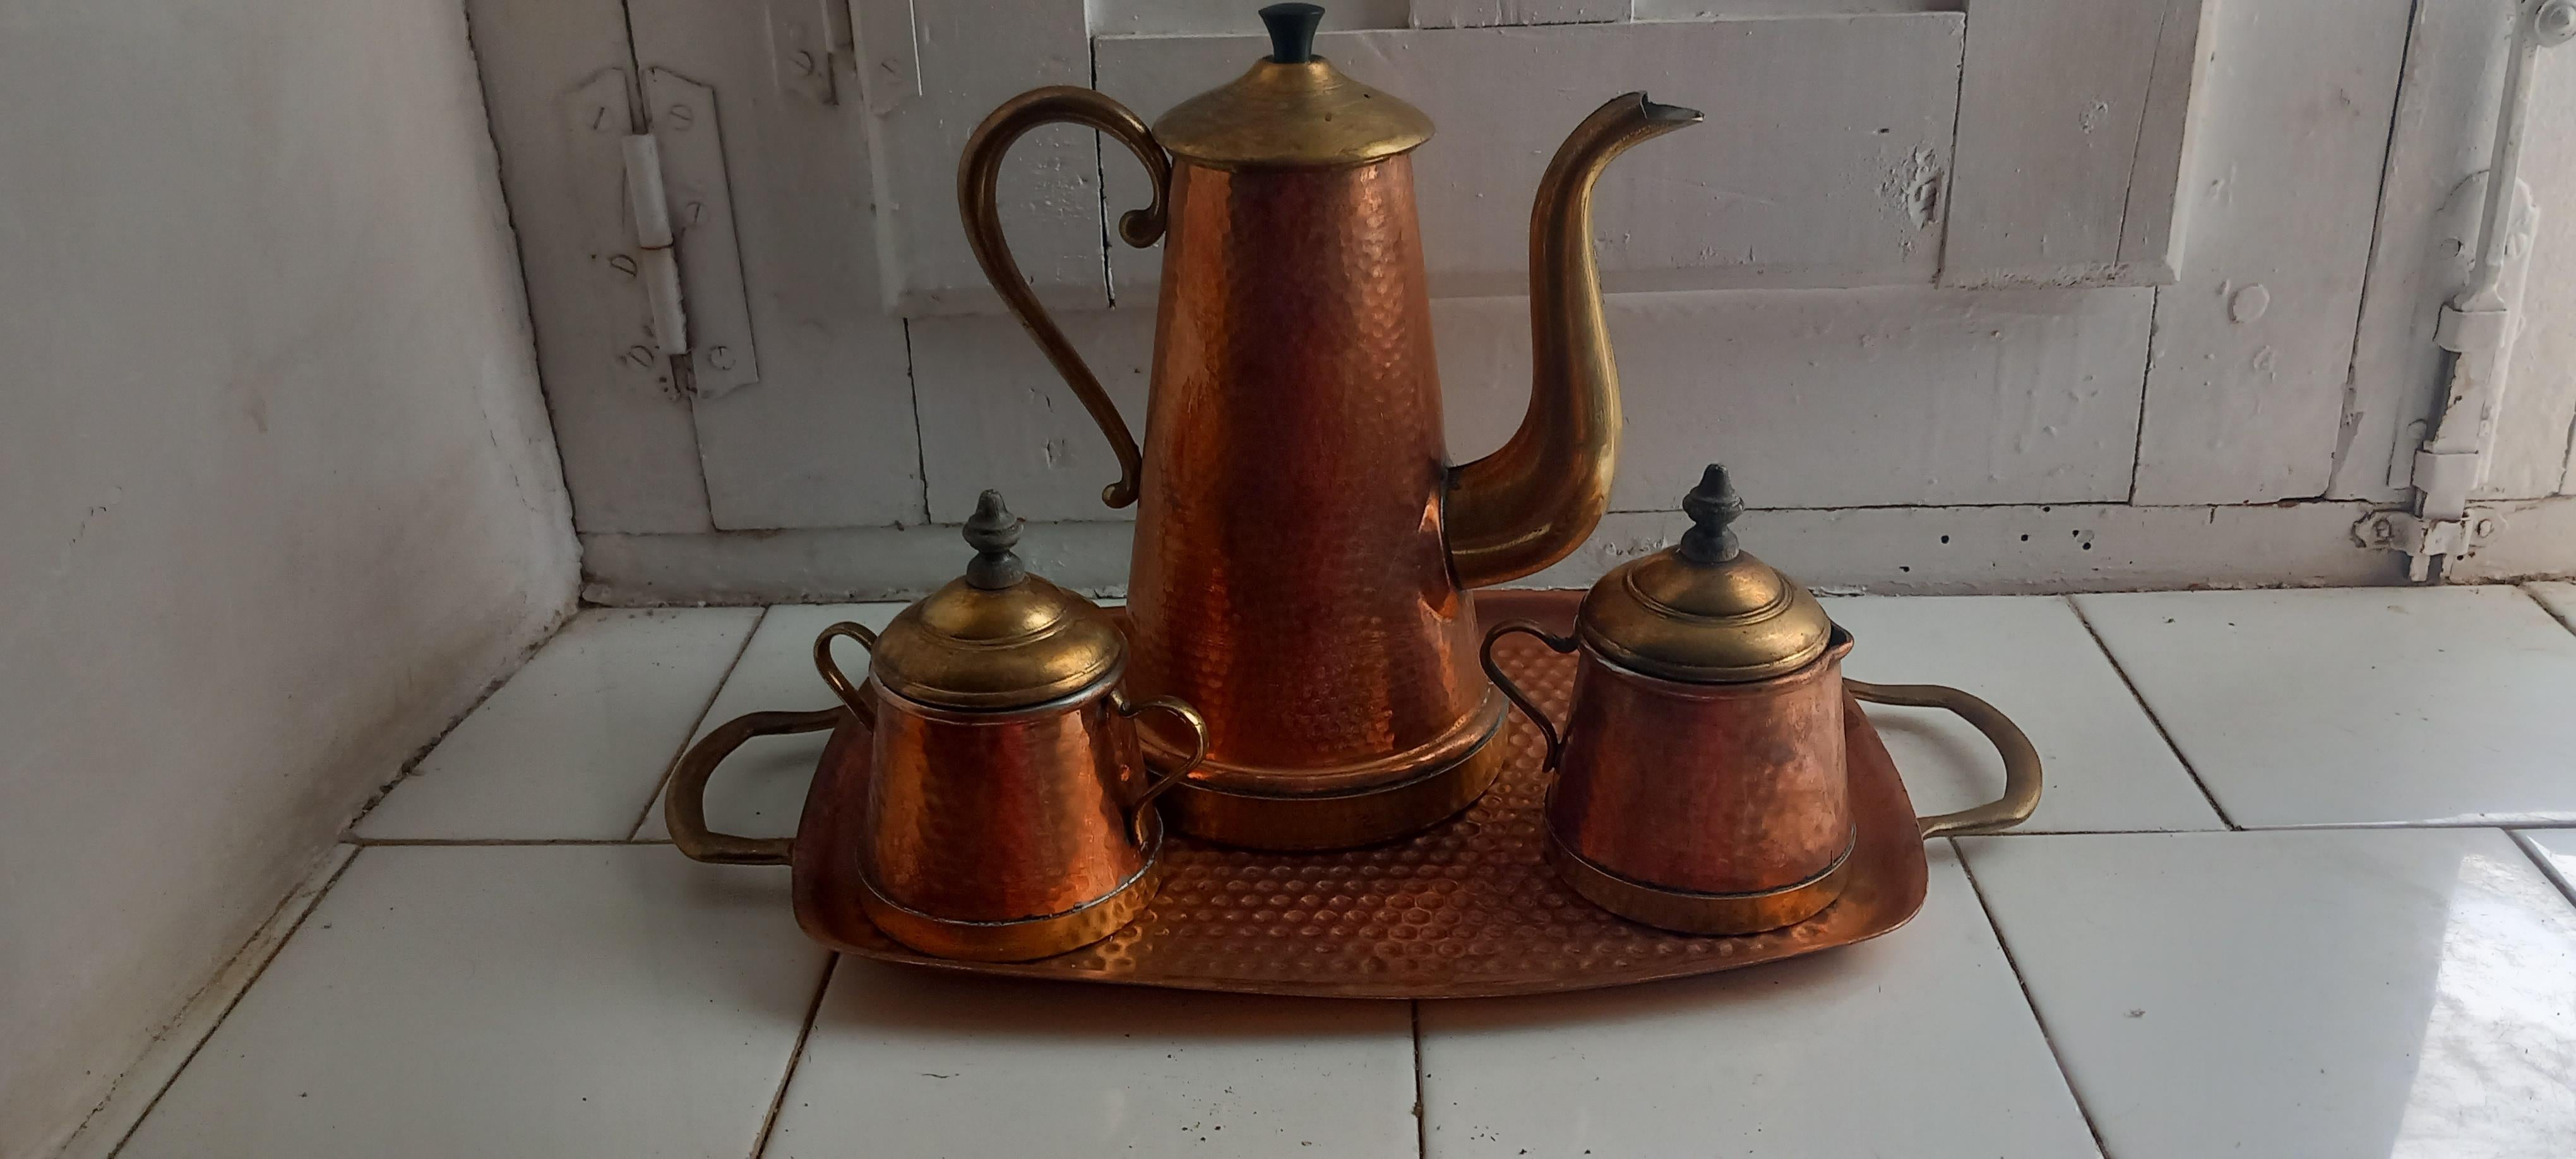 Copper and Brass Coffee or Tea set, Very Decorative  Early 20th Century For Sale 9